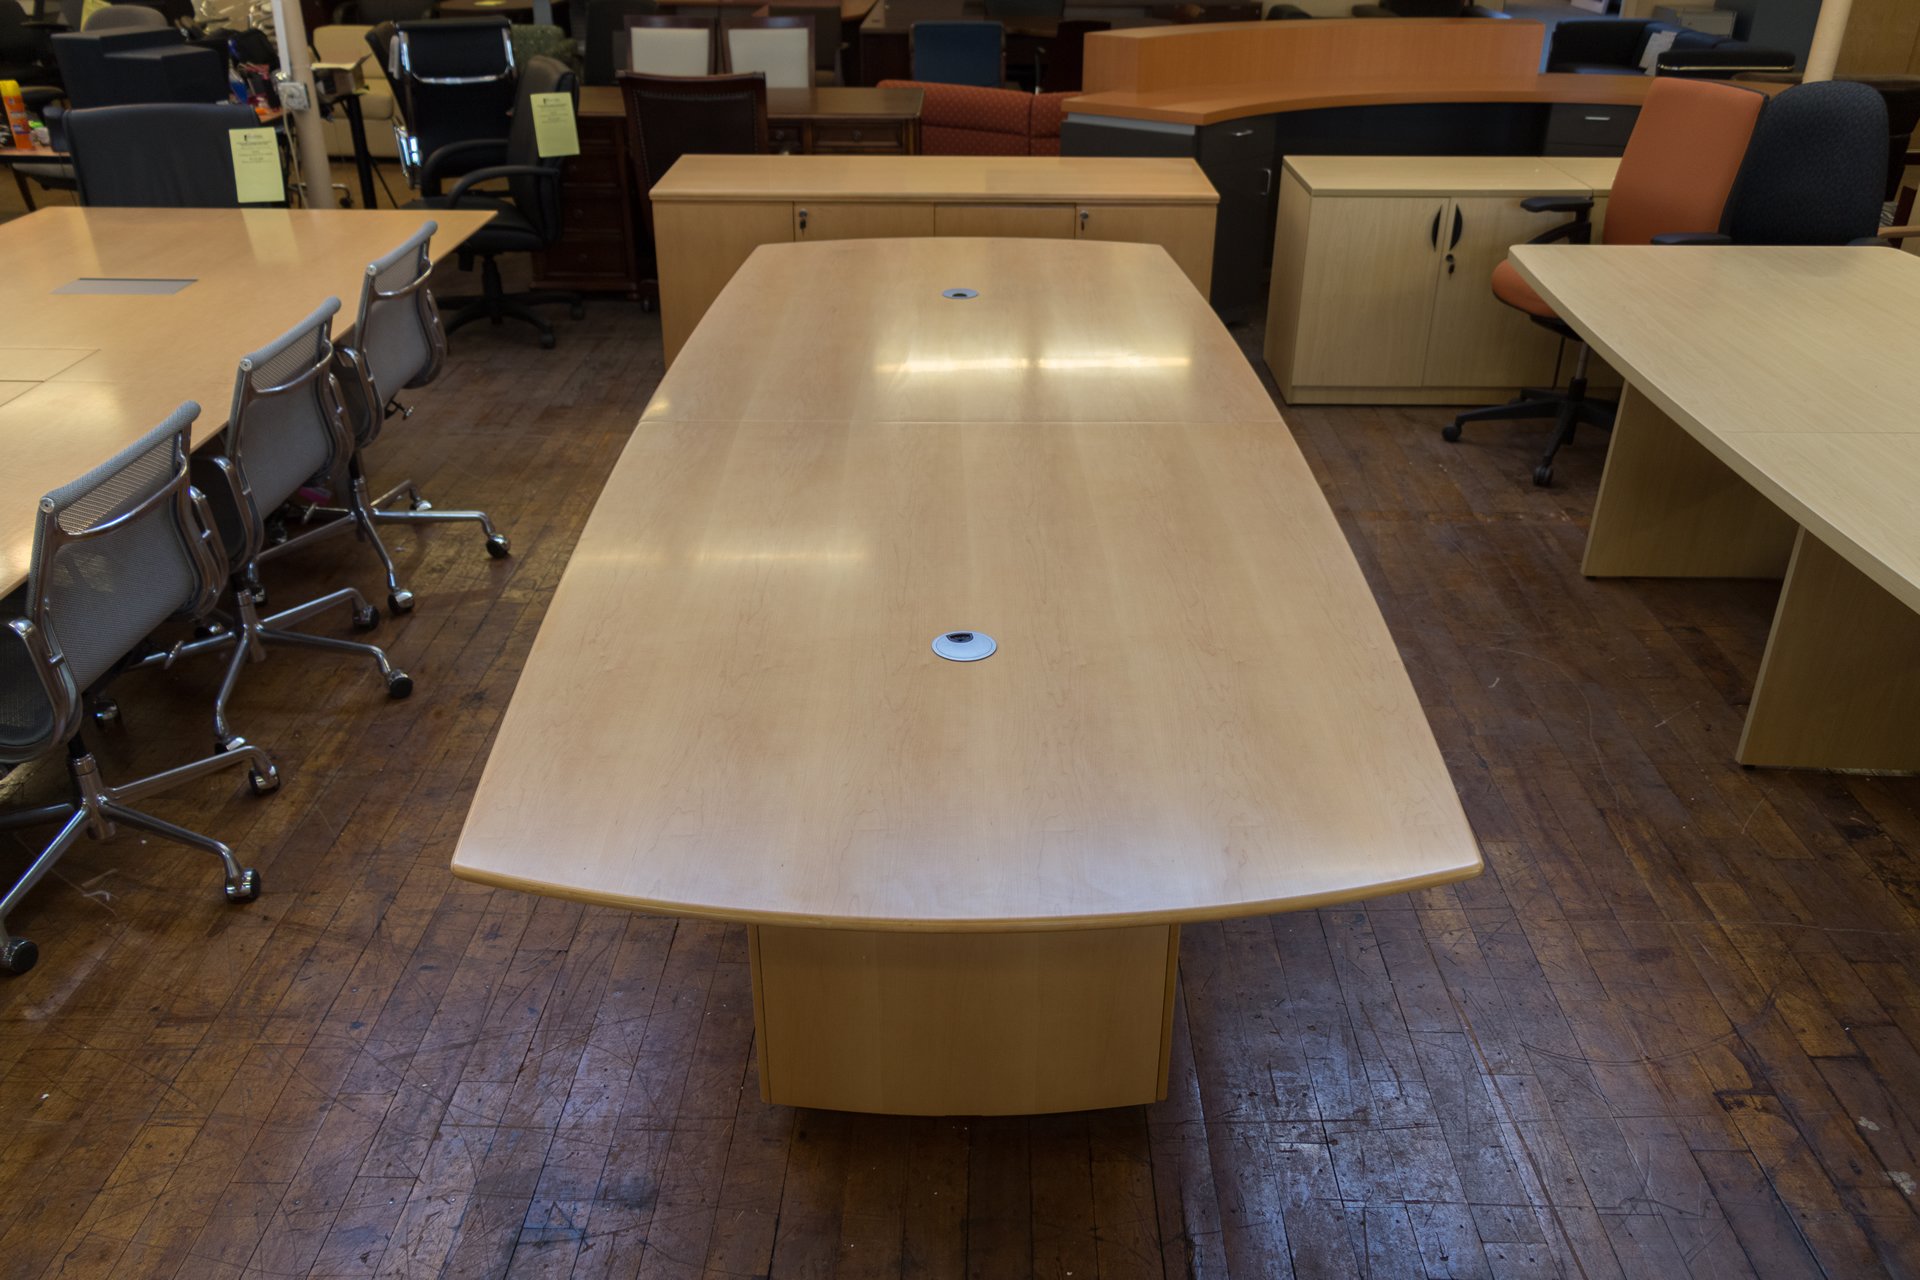 peartreeofficefurniture_peartreeofficefurniture_peartreeofficefurniture_peartree-sienna-series-boat-shaped-wood-conference-table-1.jpg